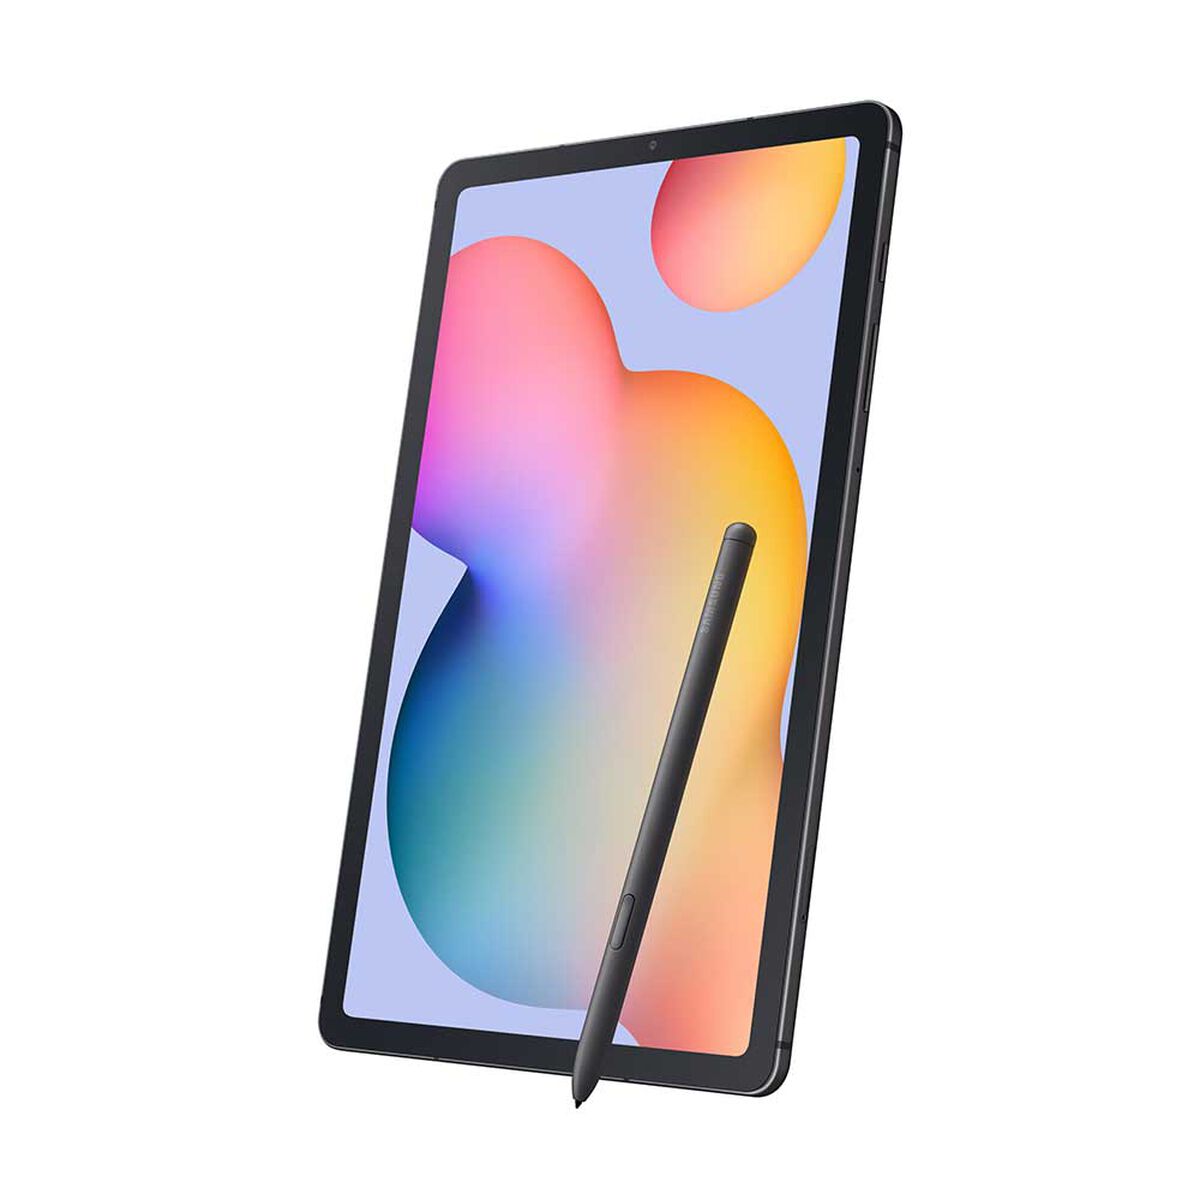 Tablet Samsung Galaxy Tab S6 Lite 4G LTE SM7125 Octa-Core 4GB 64GB 10,4" Gris Oscuro + Book Cover 2022